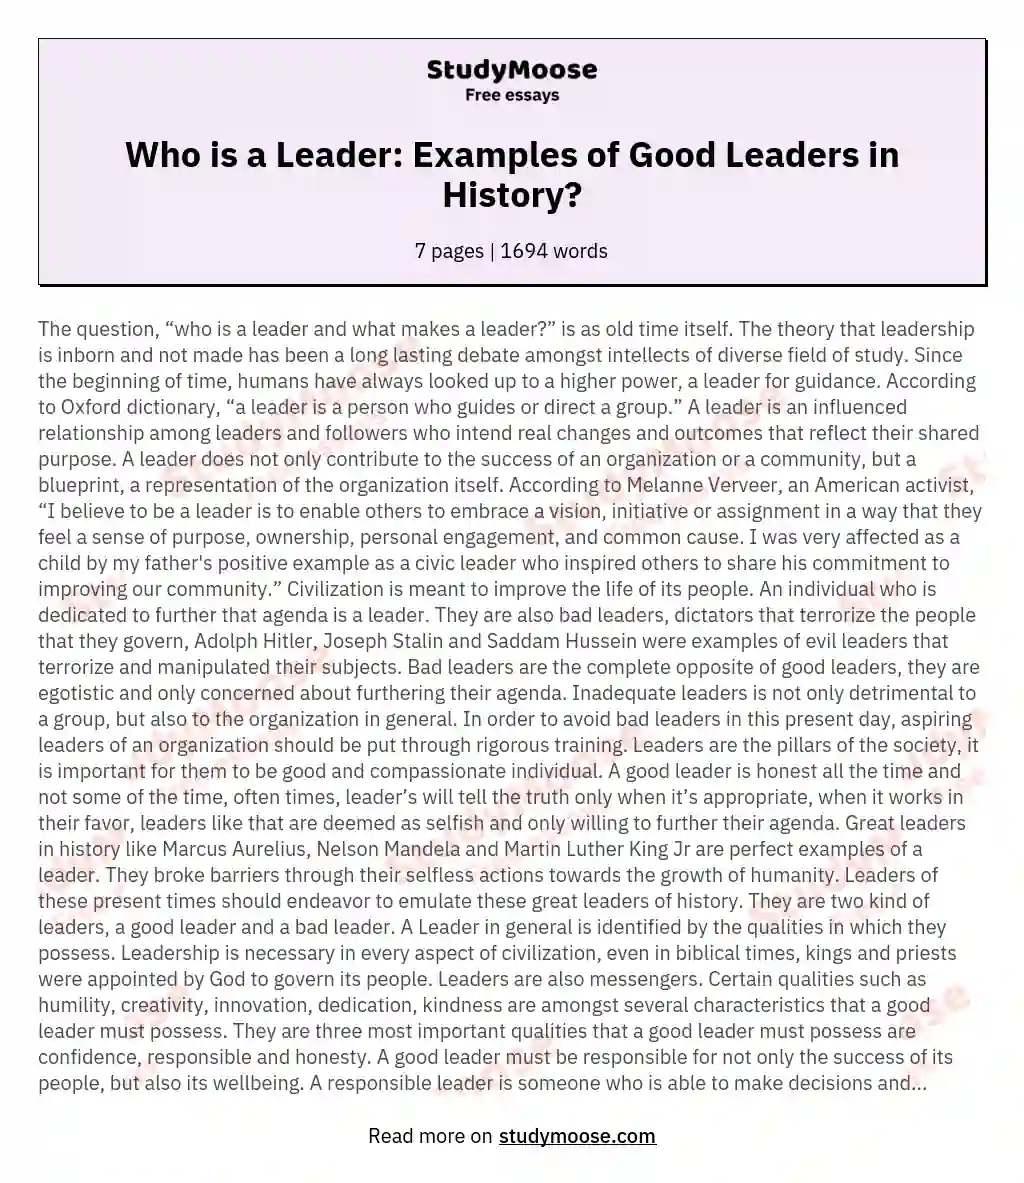 Who is a Leader: Examples of Good Leaders in History?